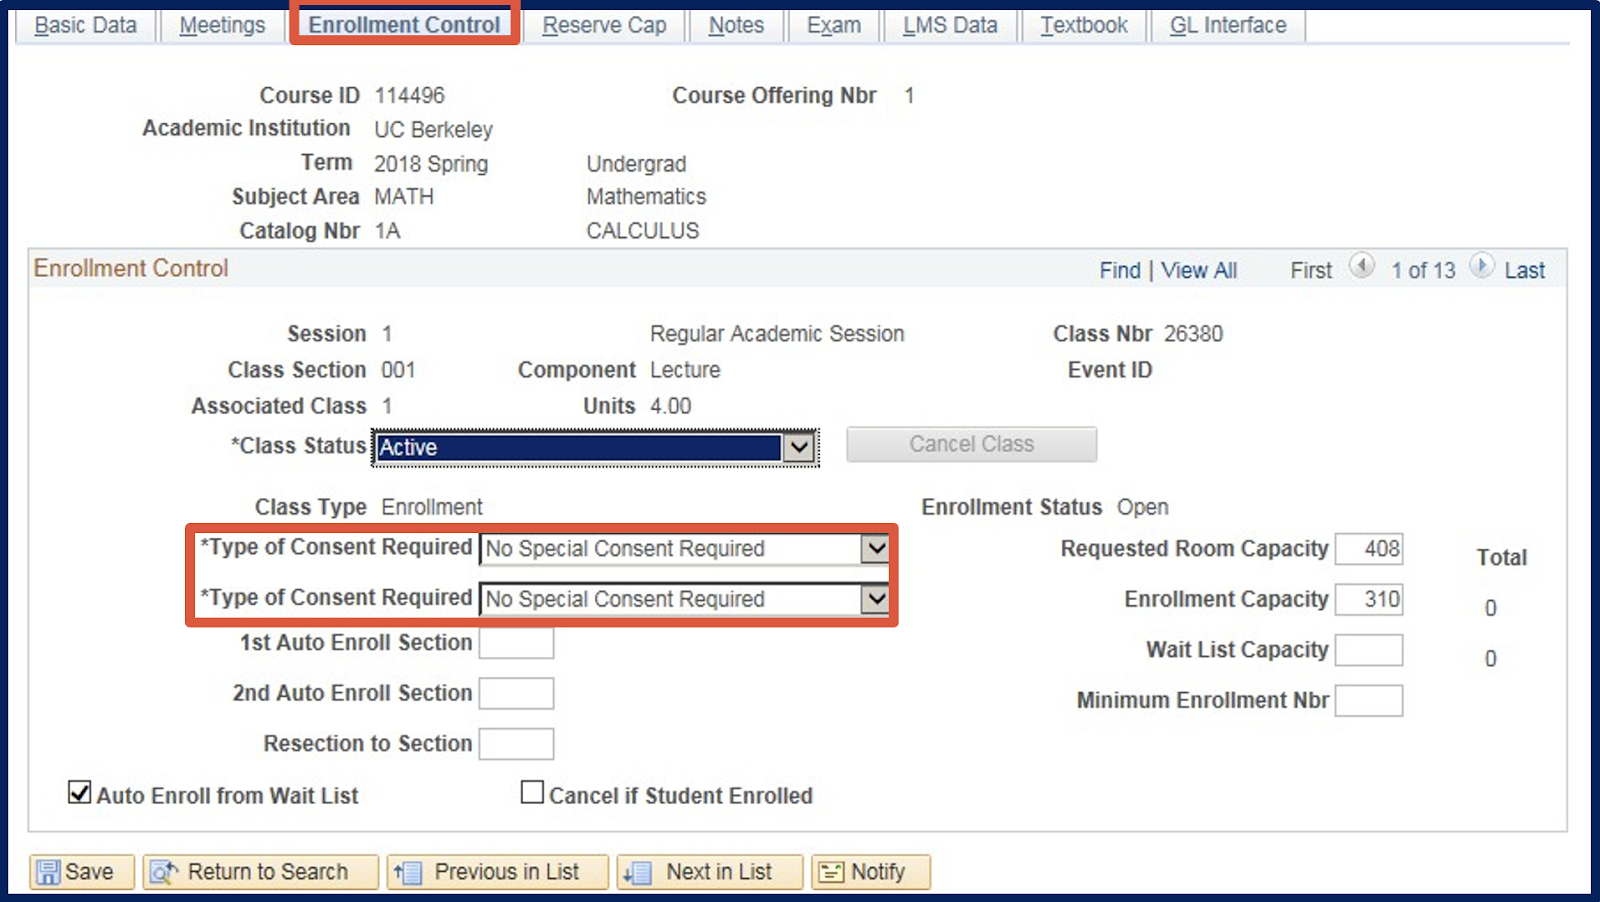 Choose the Type of Consent Required under the Enrollment Control tab